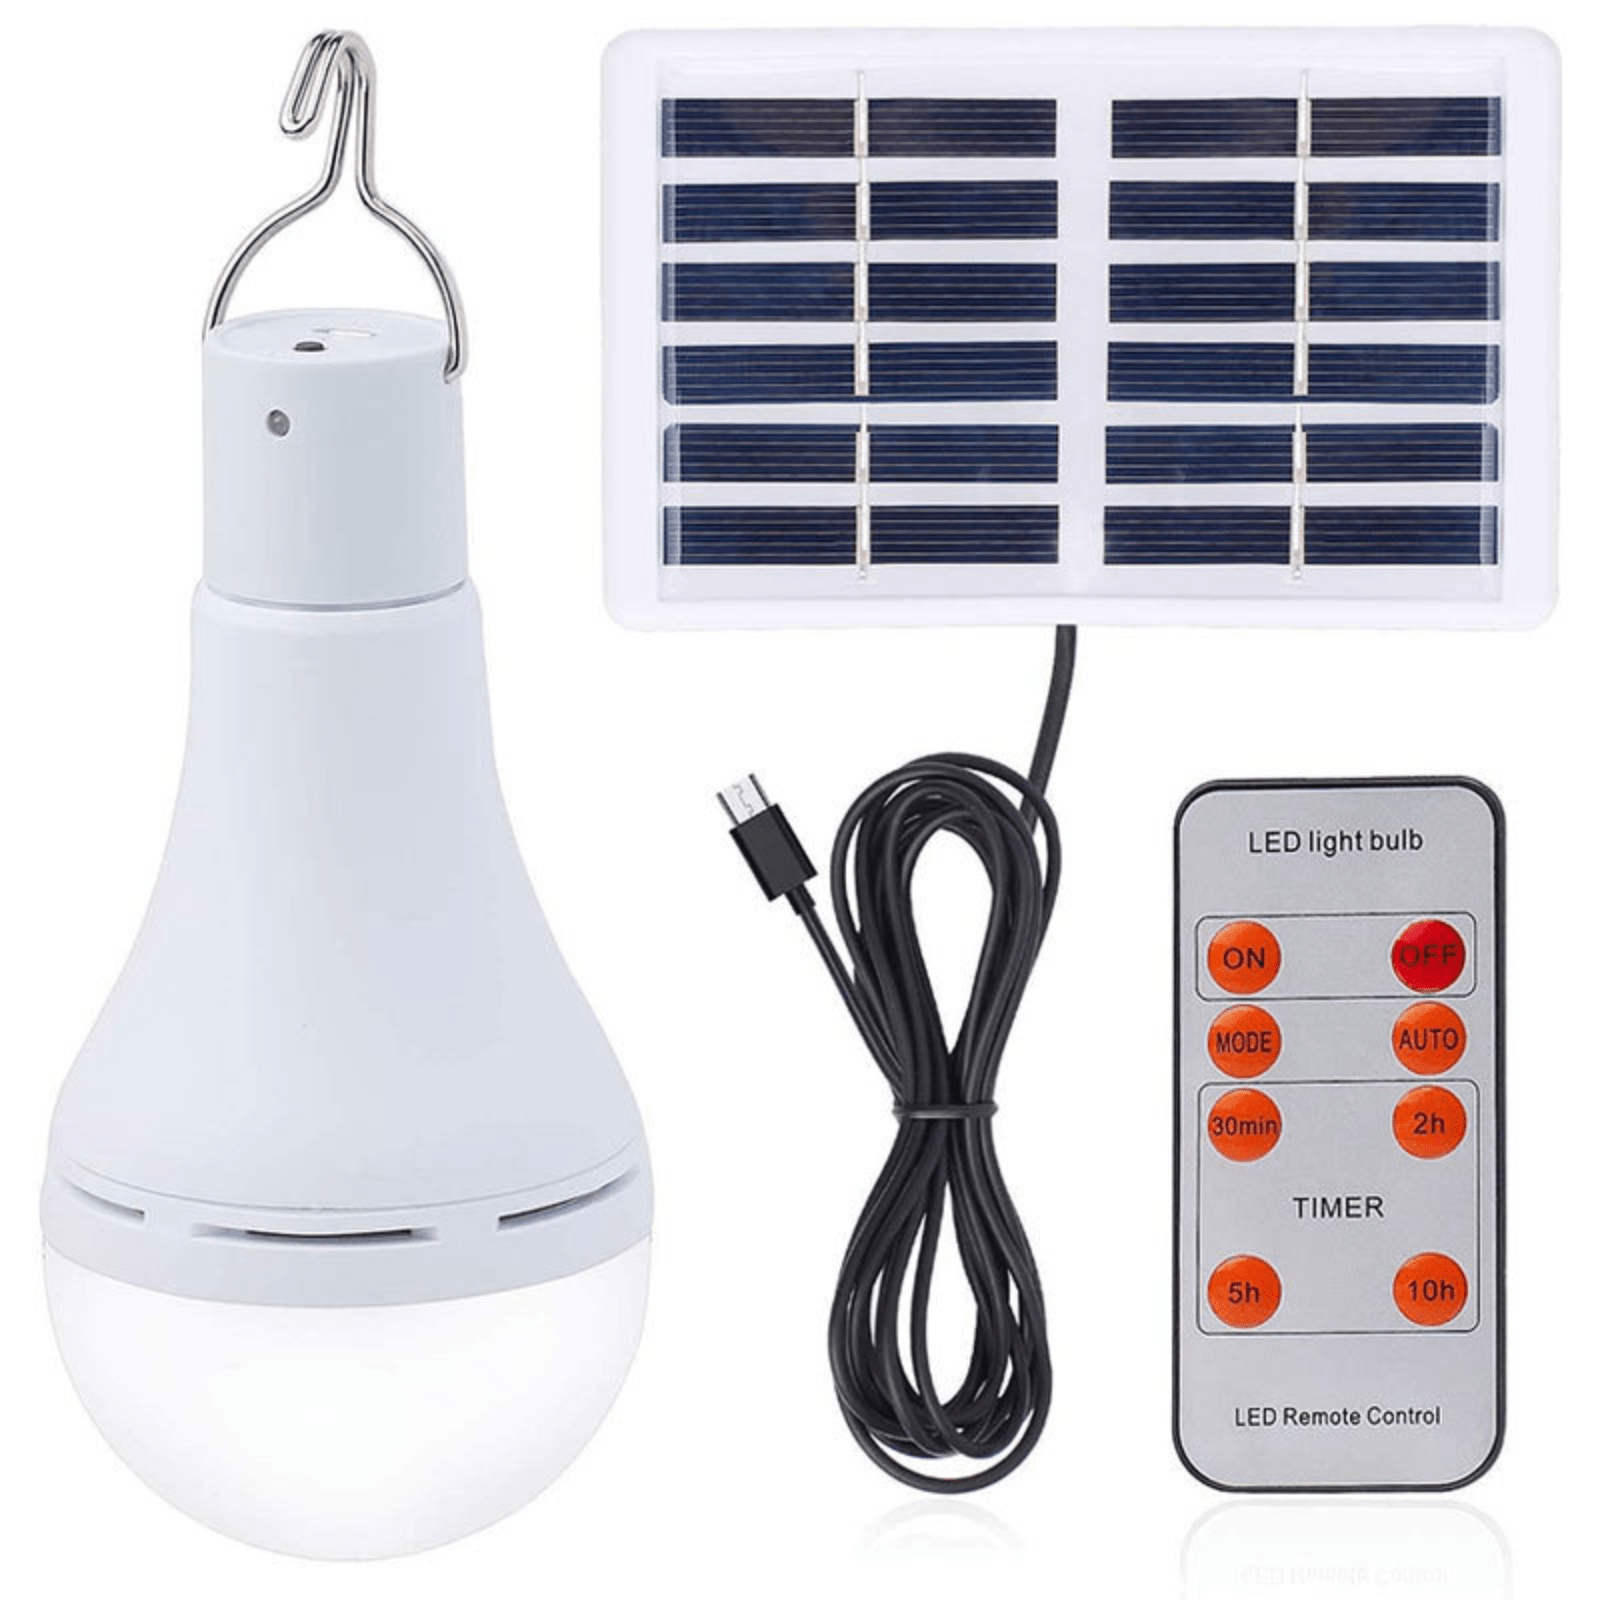 2pcs Portable Solar Powered LED Bulb Lights, Outdoor Solar Energy Lamp  Lighting for Home Fishing Camping Tent Emergency, Rechargeable Light 